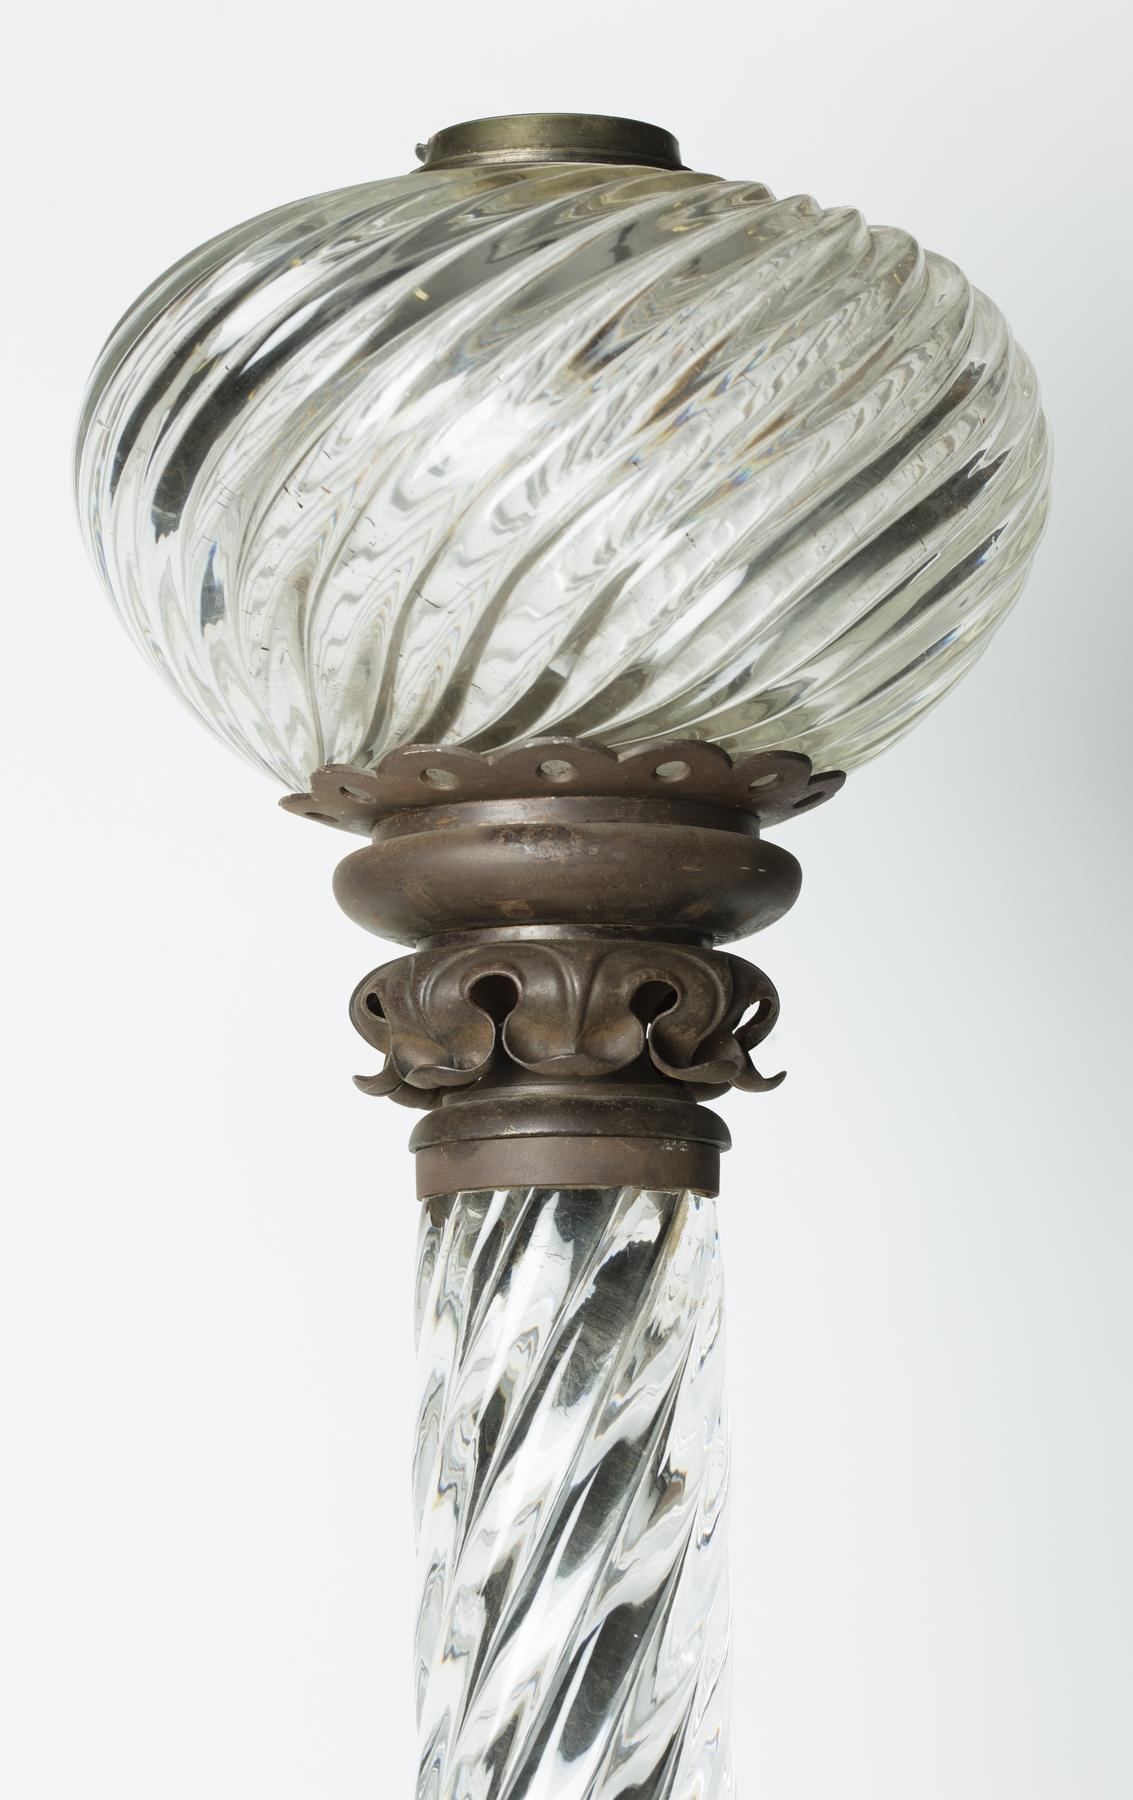 Large floor lamp in solid crystal and wrought iron, working on oil.
Traditionally placed at the start of a winding staircase, in a castle or private mansion.
England late 19th century.
Measures: Height: 6 ft. 10.28 in
Diameter of the base: 26.78